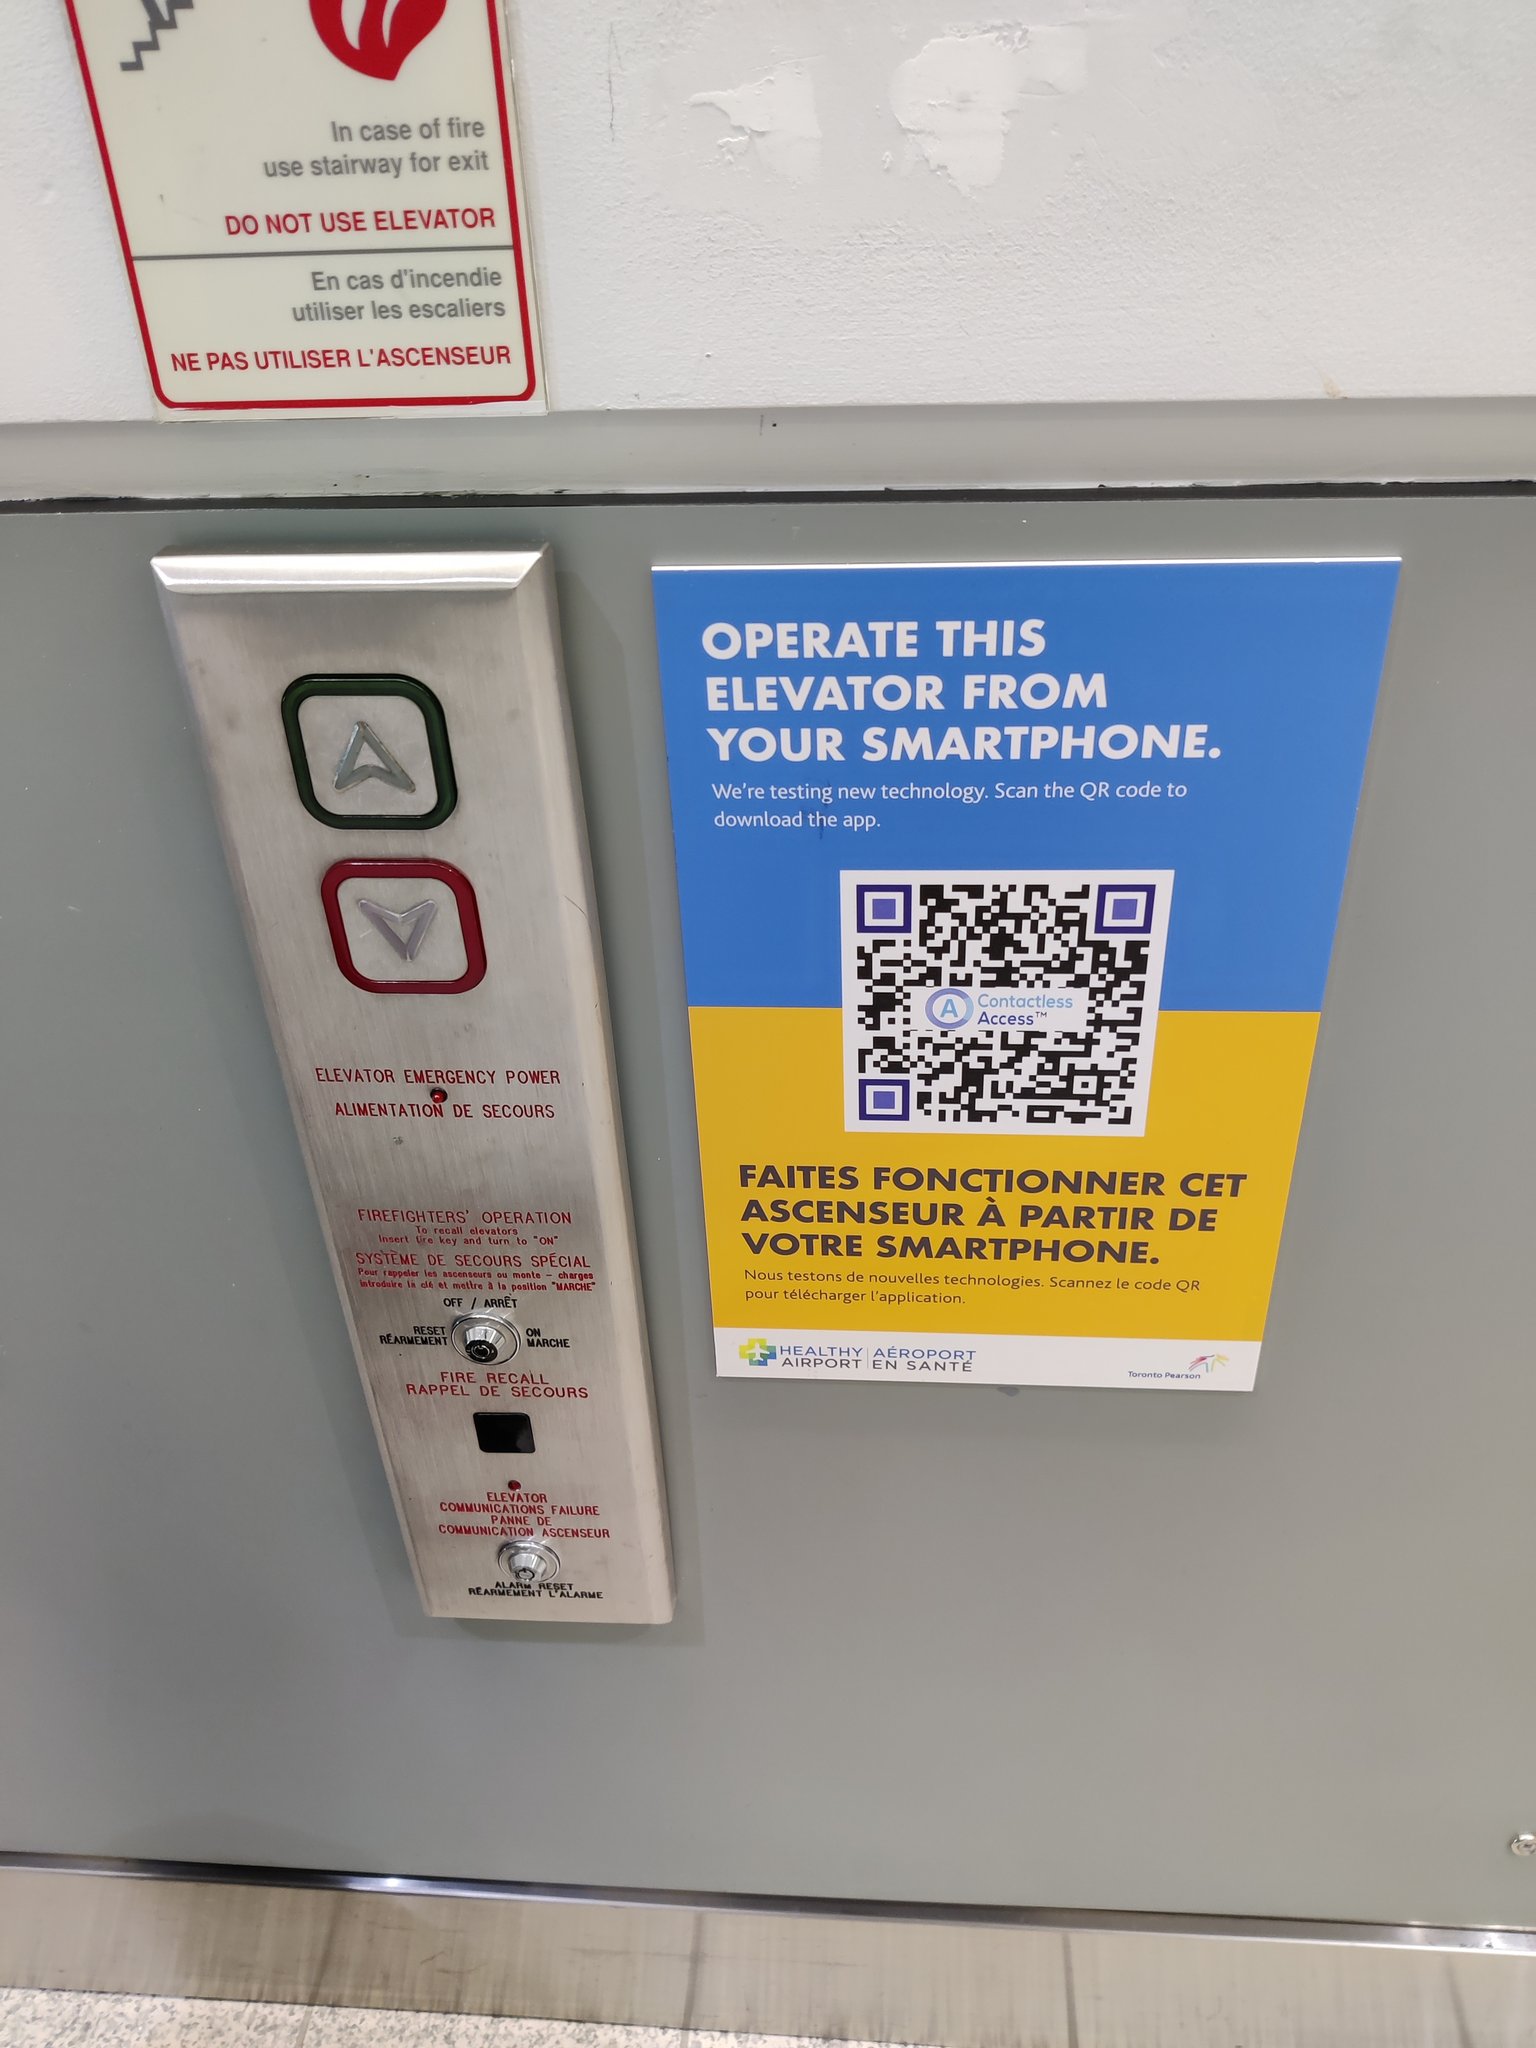 Baral Twitter: "So I can scan the qr code, download app, open the app, scan the qr code with the app to tell it what elevator I'm at, and